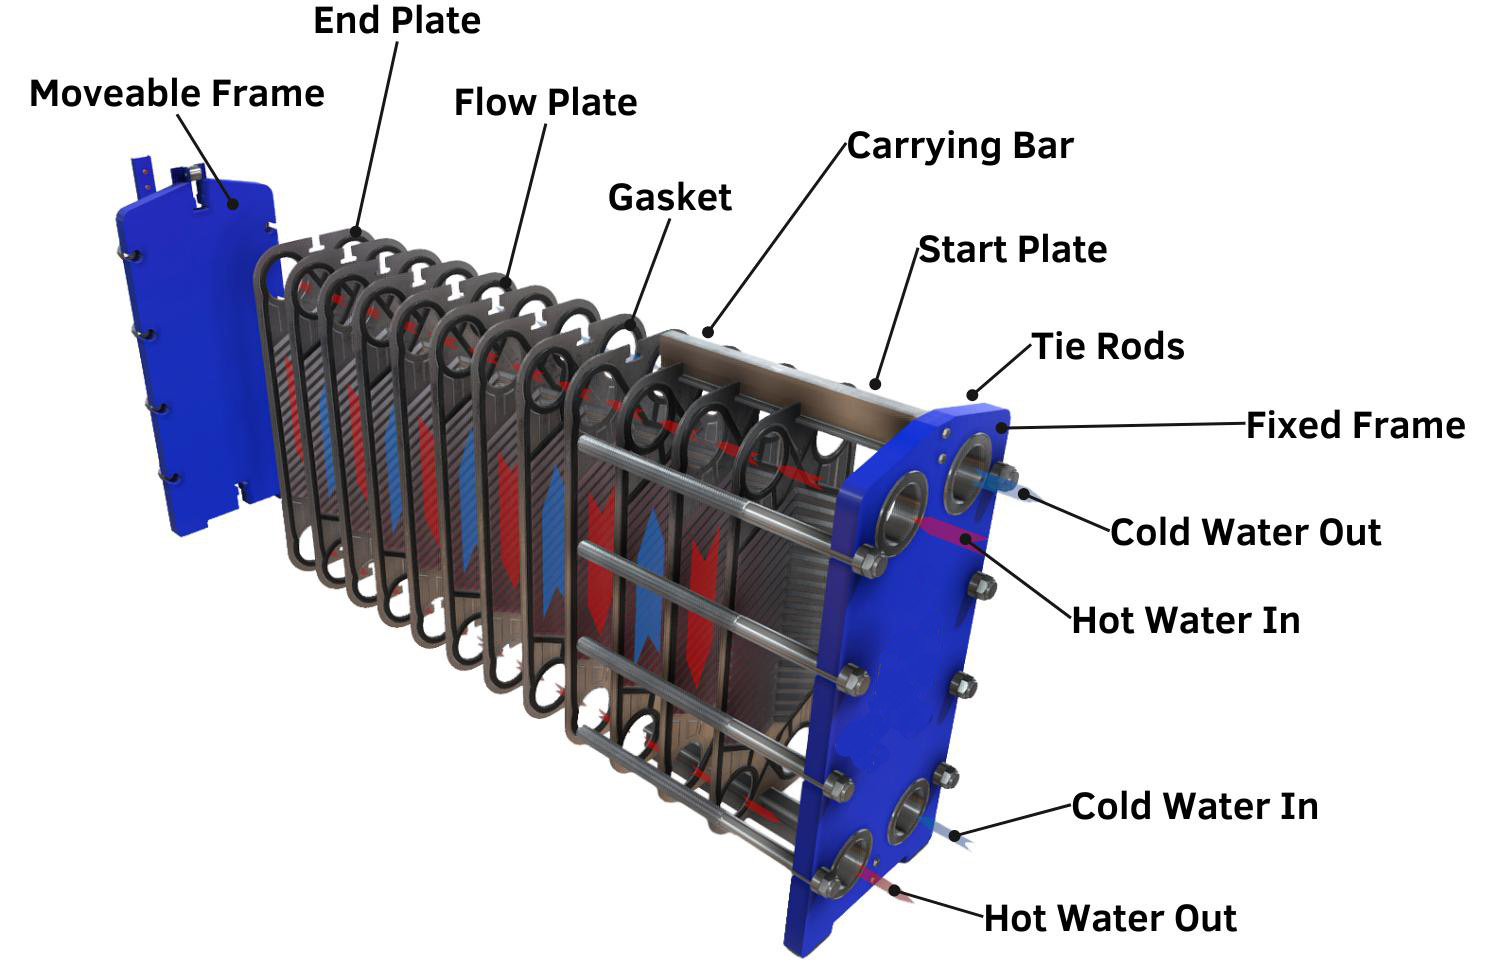 The basic funcation of each component of the plate heat exchanger